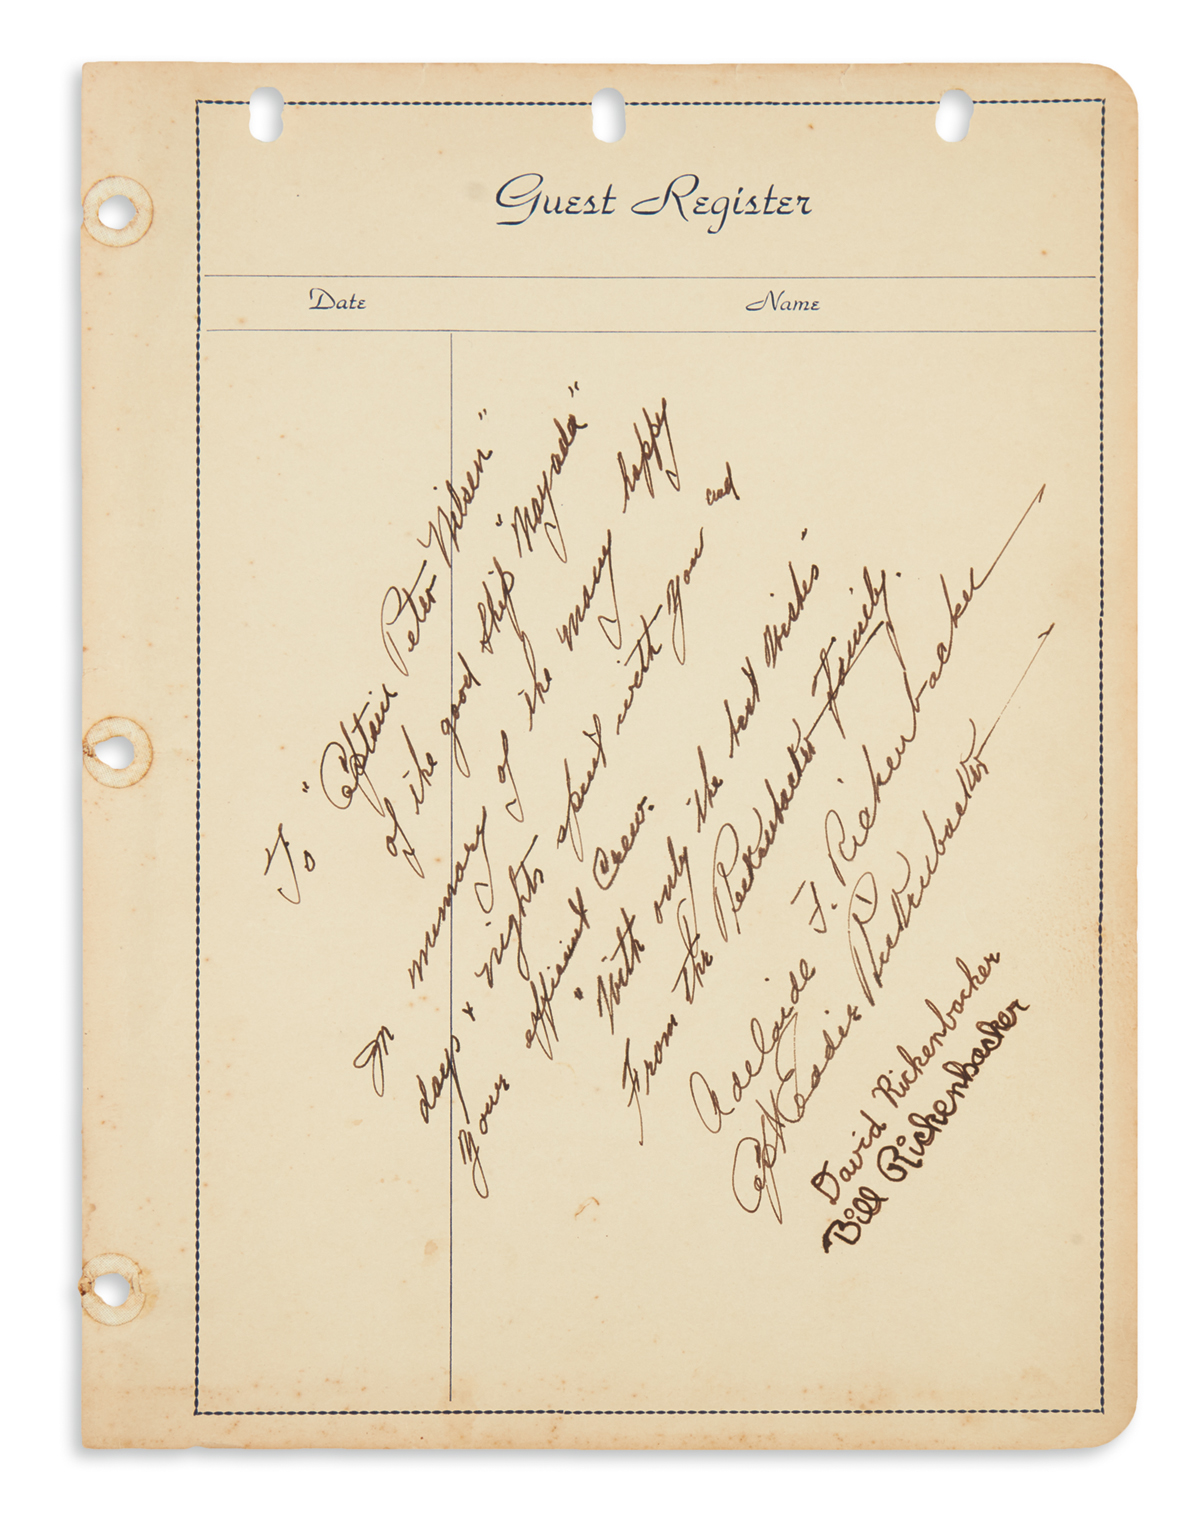 (ALBUM.) Guest book for the yacht Nayada containing over 50 Signatures or autograph inscriptions Signed, by notable guests.